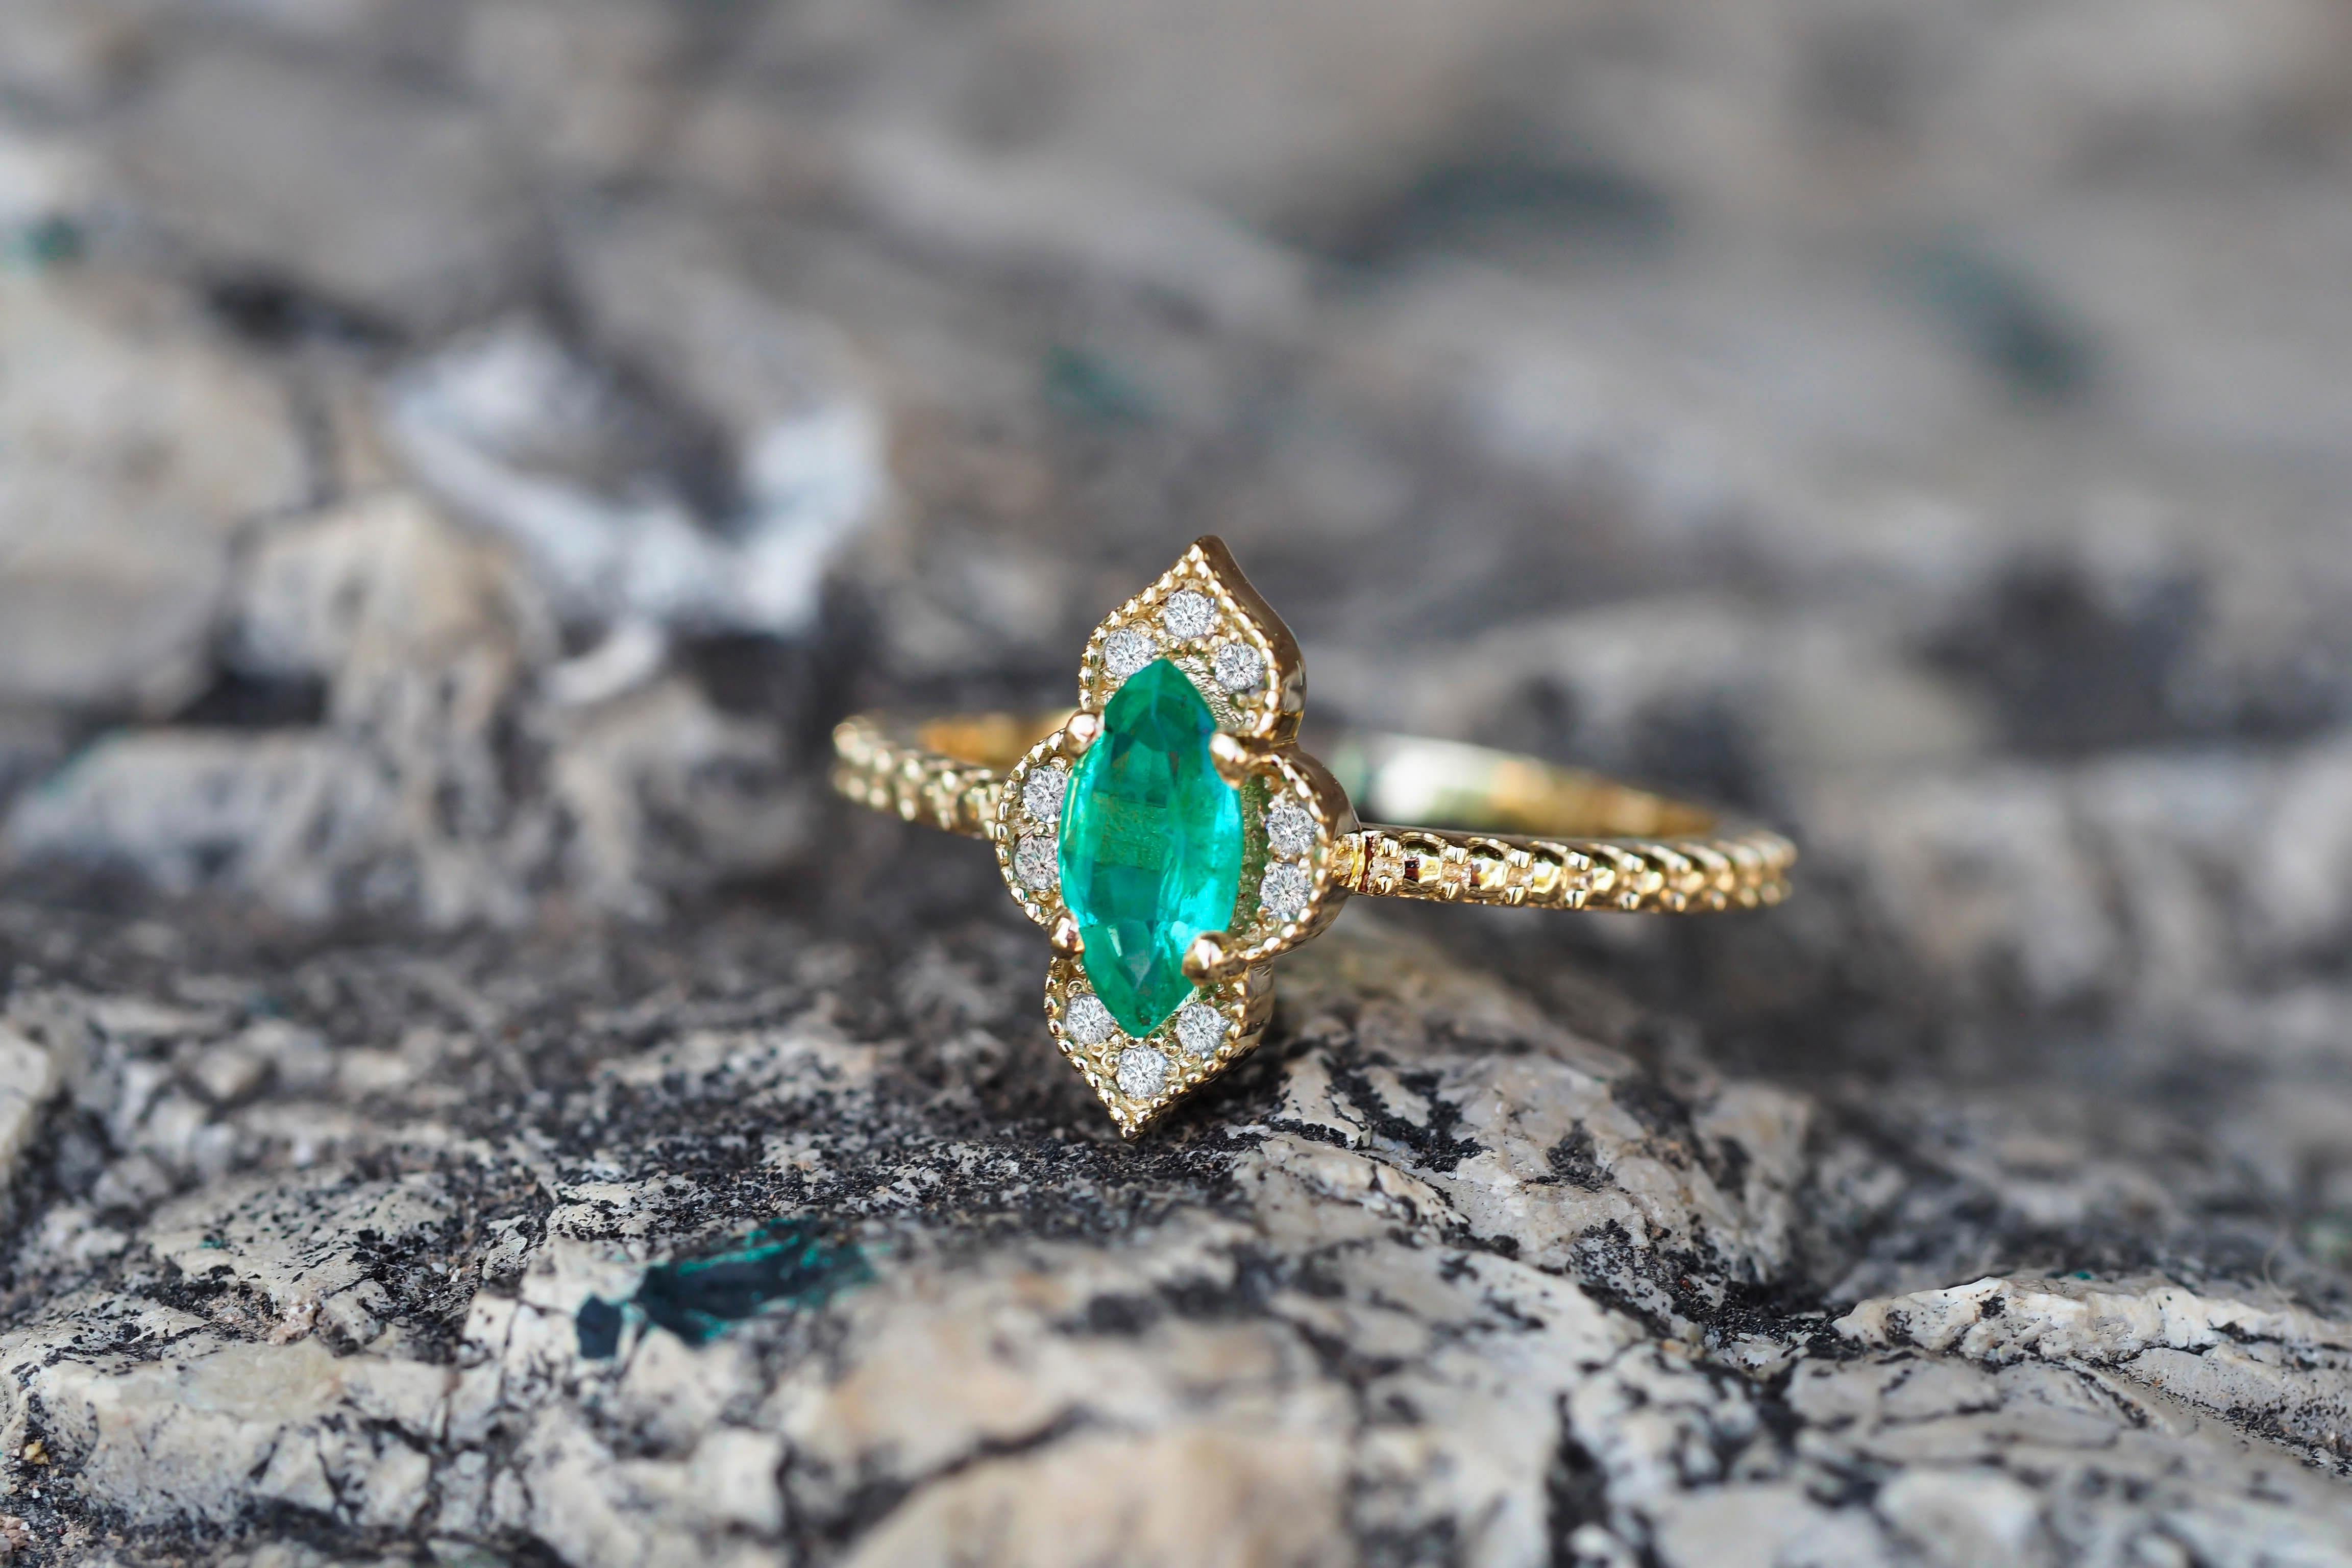 For Sale:  14k Gold Ring with Marquise Cut Emerald and Diamonds 10